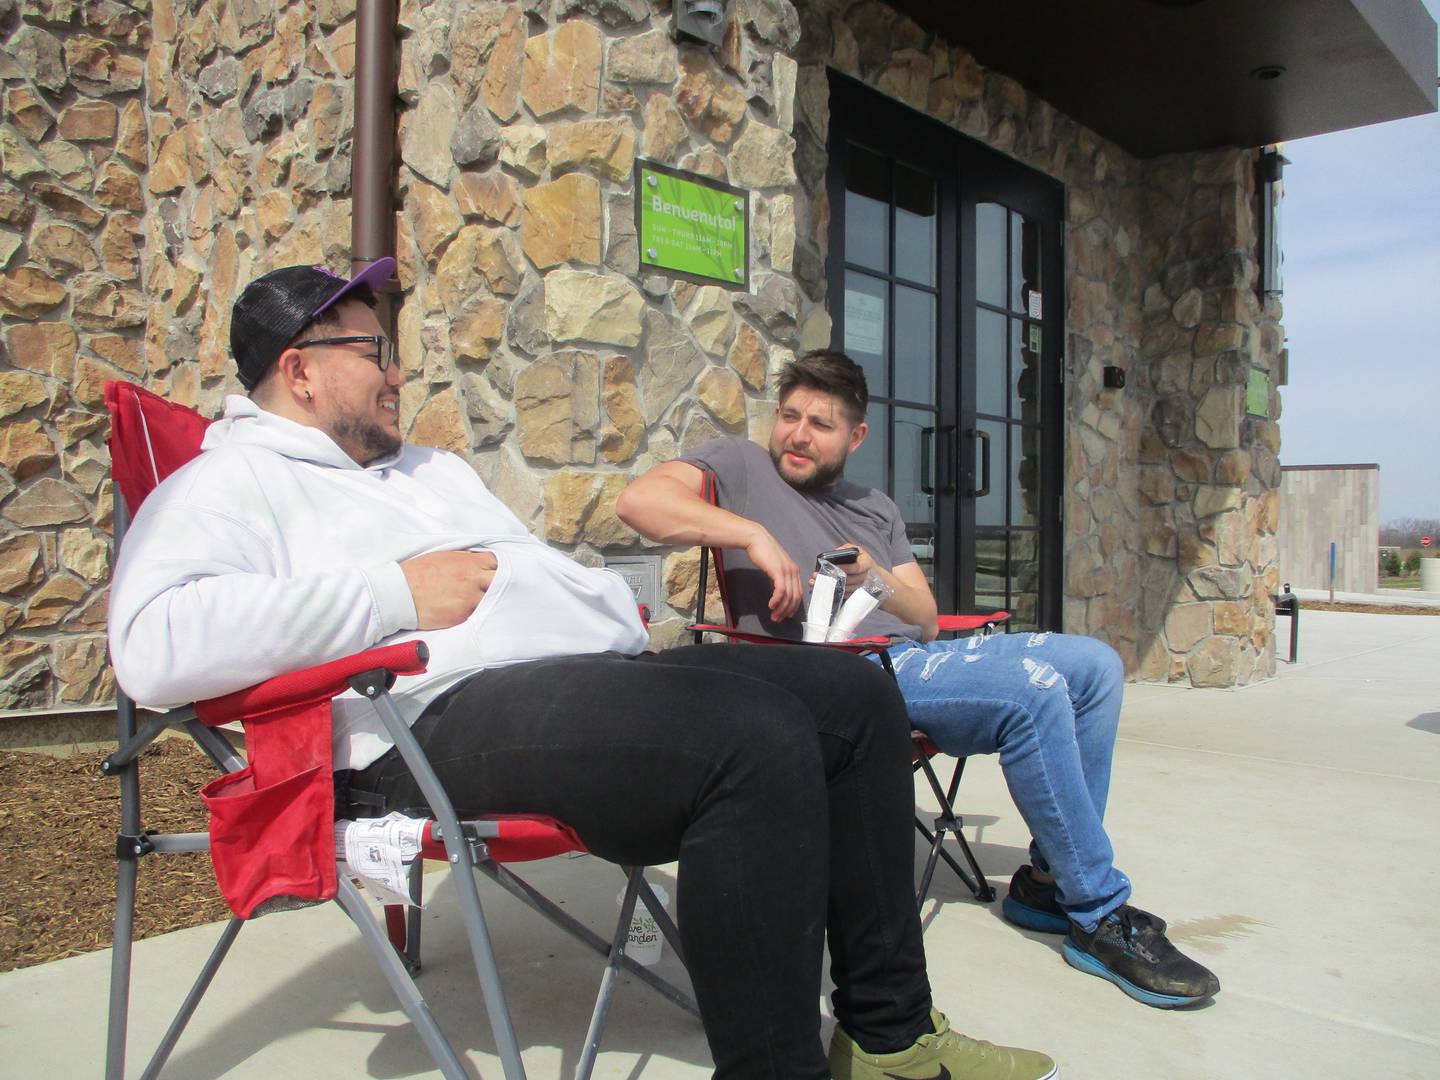 Sebastian Escudero (left) of Lockport and friend Rene Villanueva of Crest Hill arrived early Monday morning to be the first two customers at the Olive Garden restaurant that opened in Joliet on April 10, 2023.